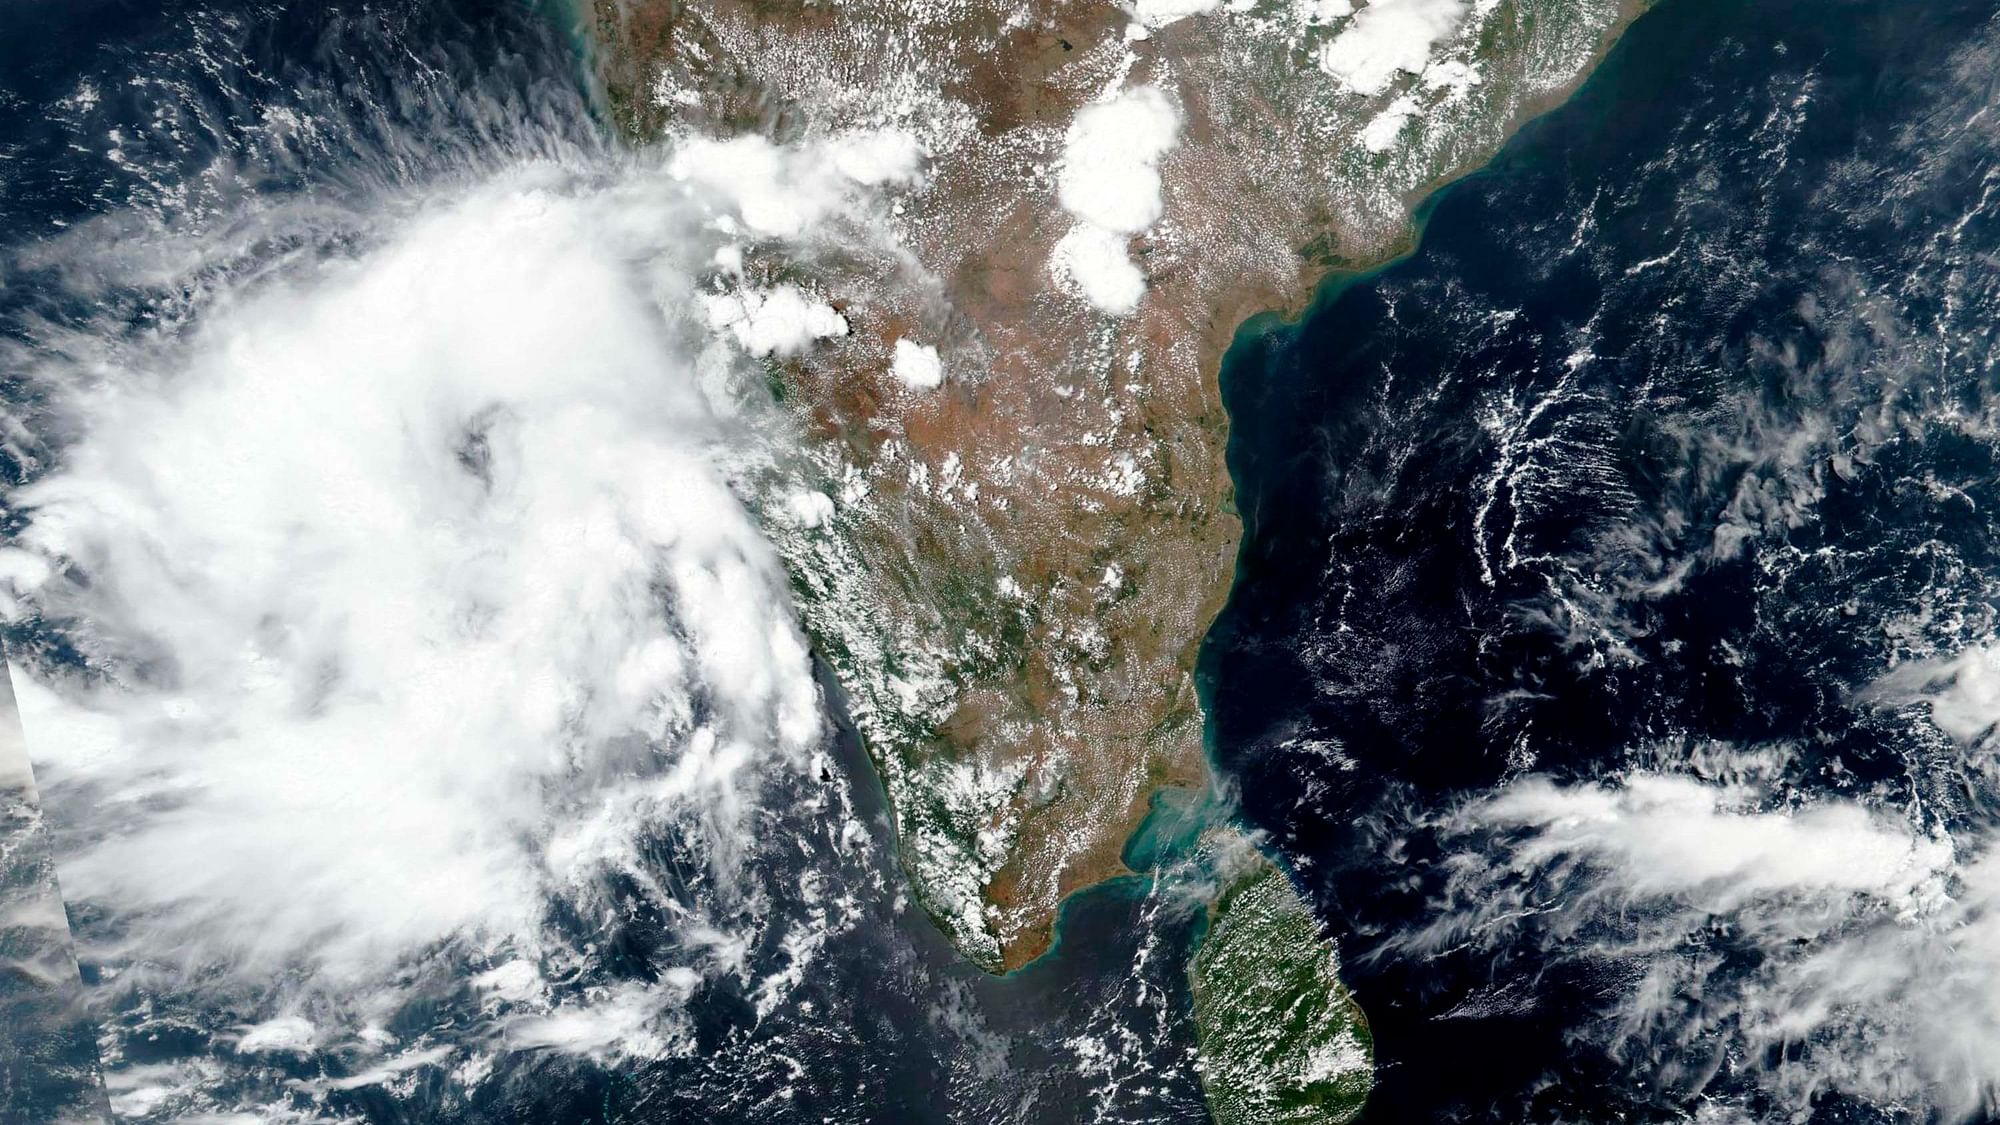 Maharashtra and Gujarat states are on pre-cyclone alert as heavy rainfall is expected in the region.  Here are a few websites which you can use to track Cyclone Nisarga.